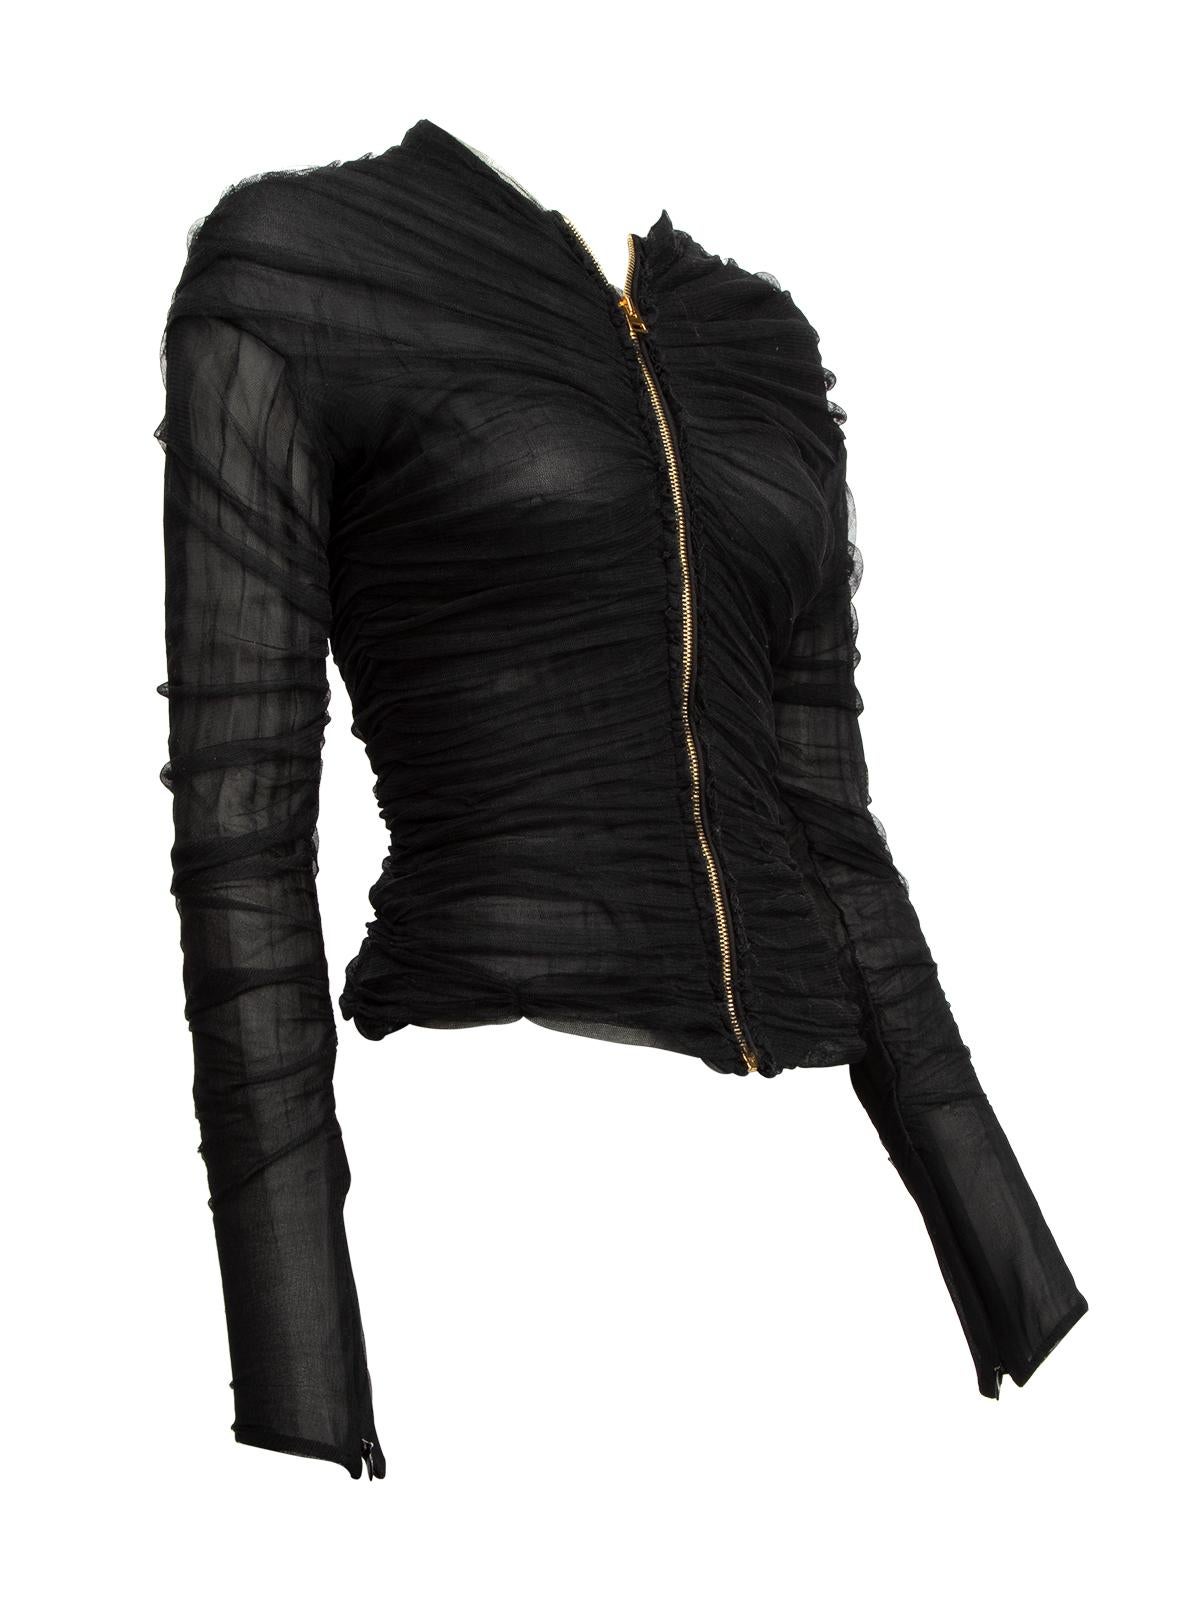 CONDITION is Good. Minor wear to top is evident. Signs of piling and pulls to mesh material near front stomach area and a hole on the sleeve of this used Tom Ford designer resale item.
 
 Details
  Black
 Silk
 Figure-hugging
 Long sleeves
